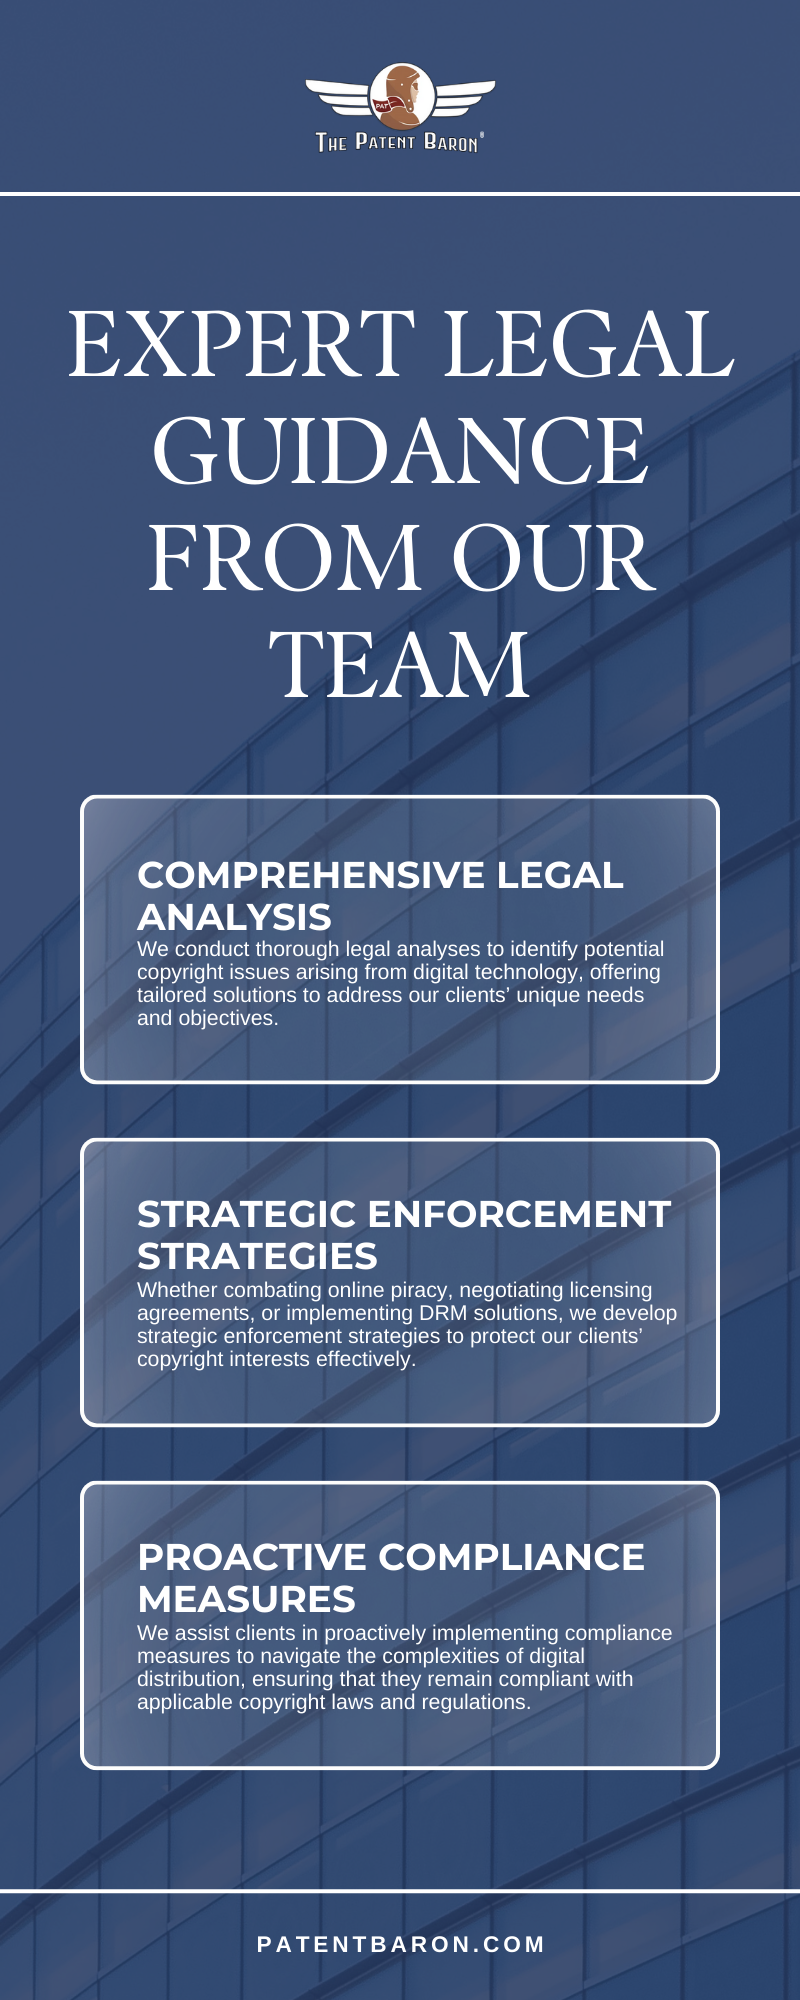 Expert Legal Guidance From Our Team Infographic